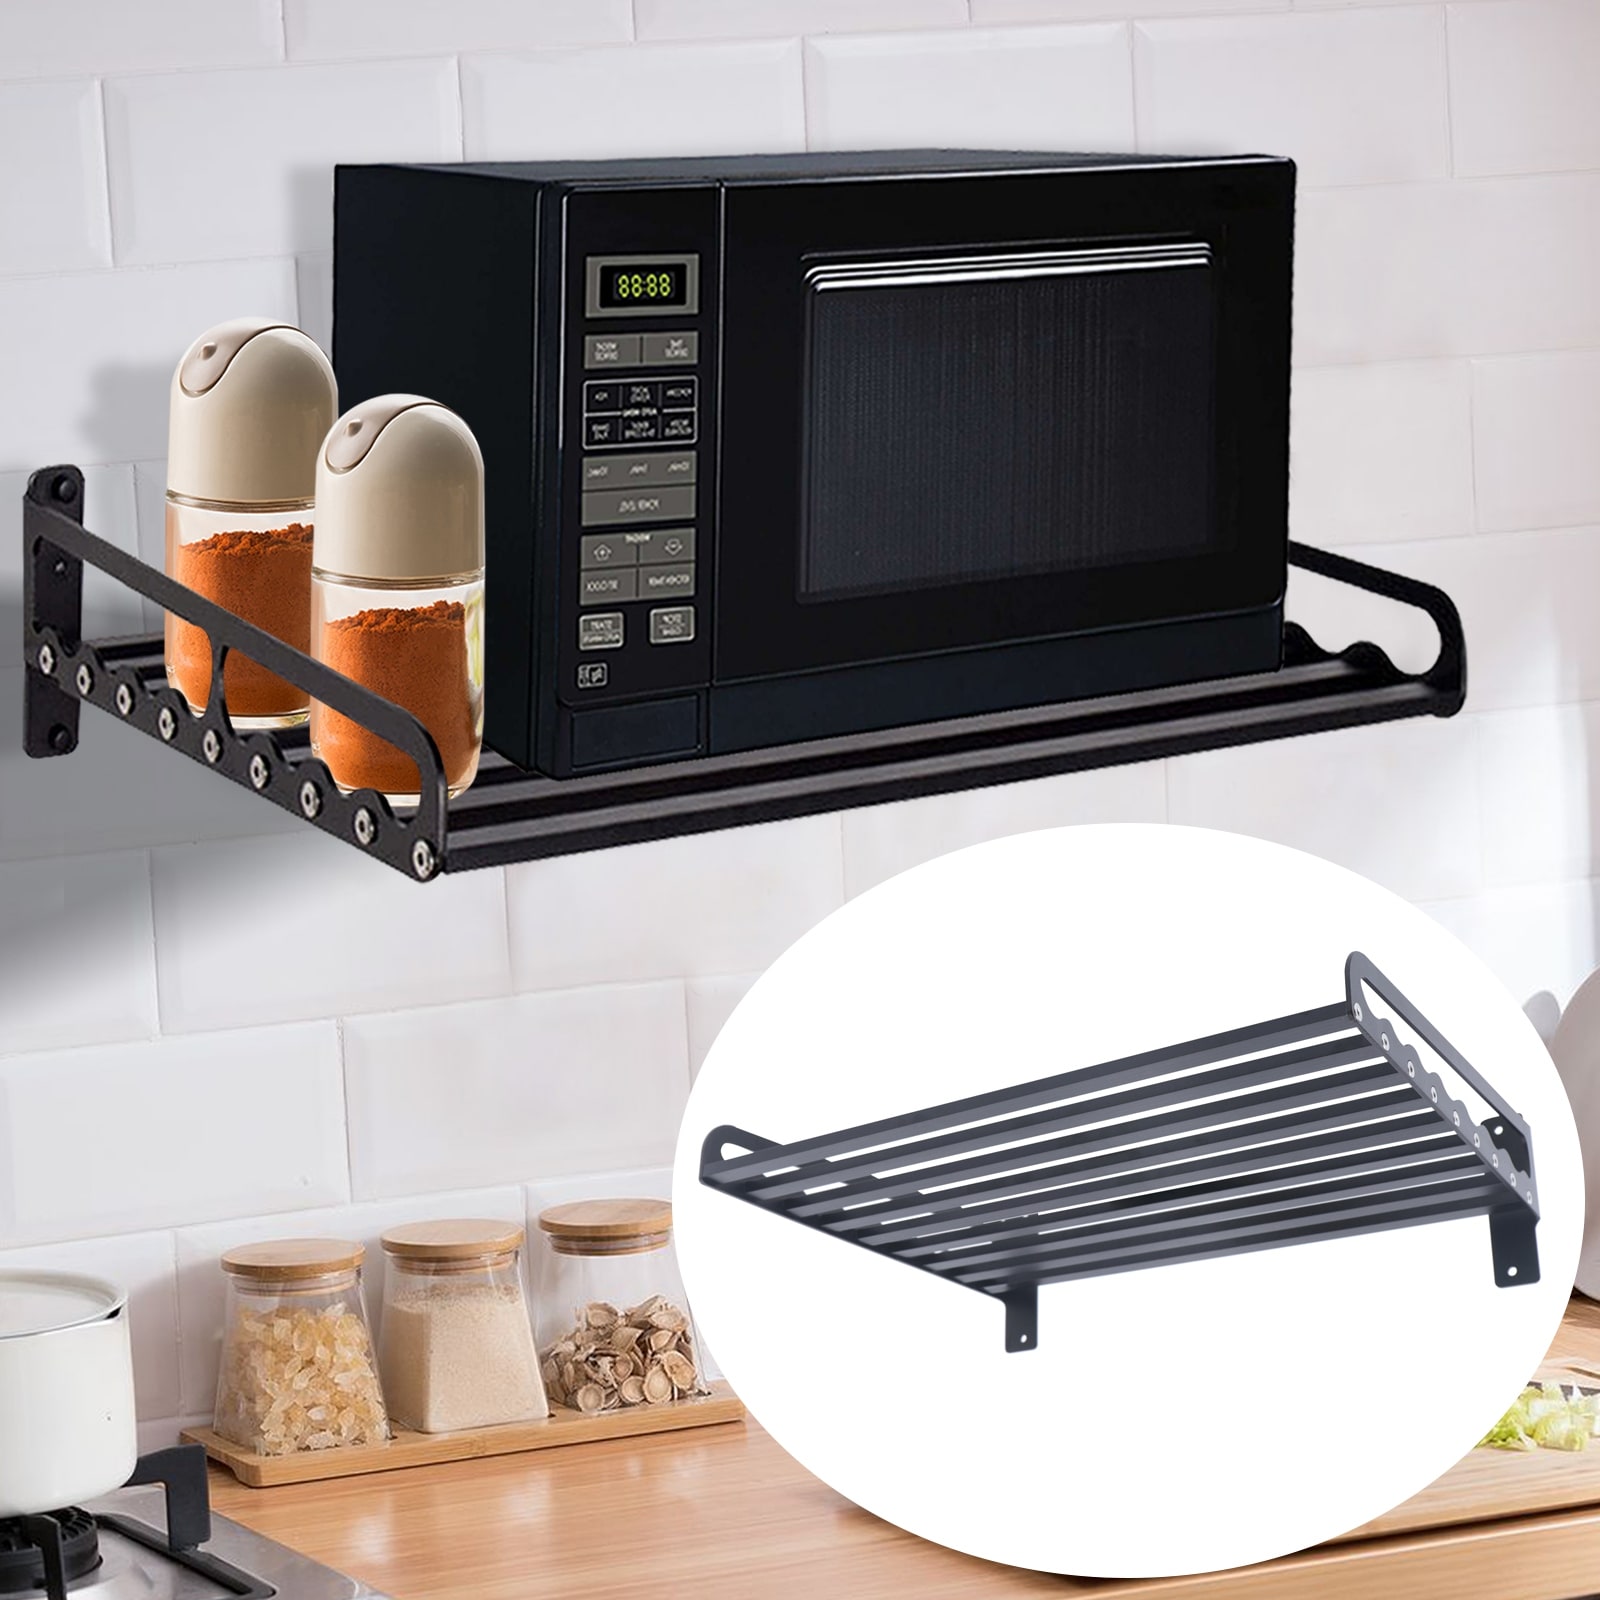 https://ak1.ostkcdn.com/images/products/is/images/direct/1038b09098433841db637aefd9709f68ed64f2e3/Wall-Mounted-Microwave-Oven-Rack-Kitchen-Bakers-Rack-Space-Saving.jpg